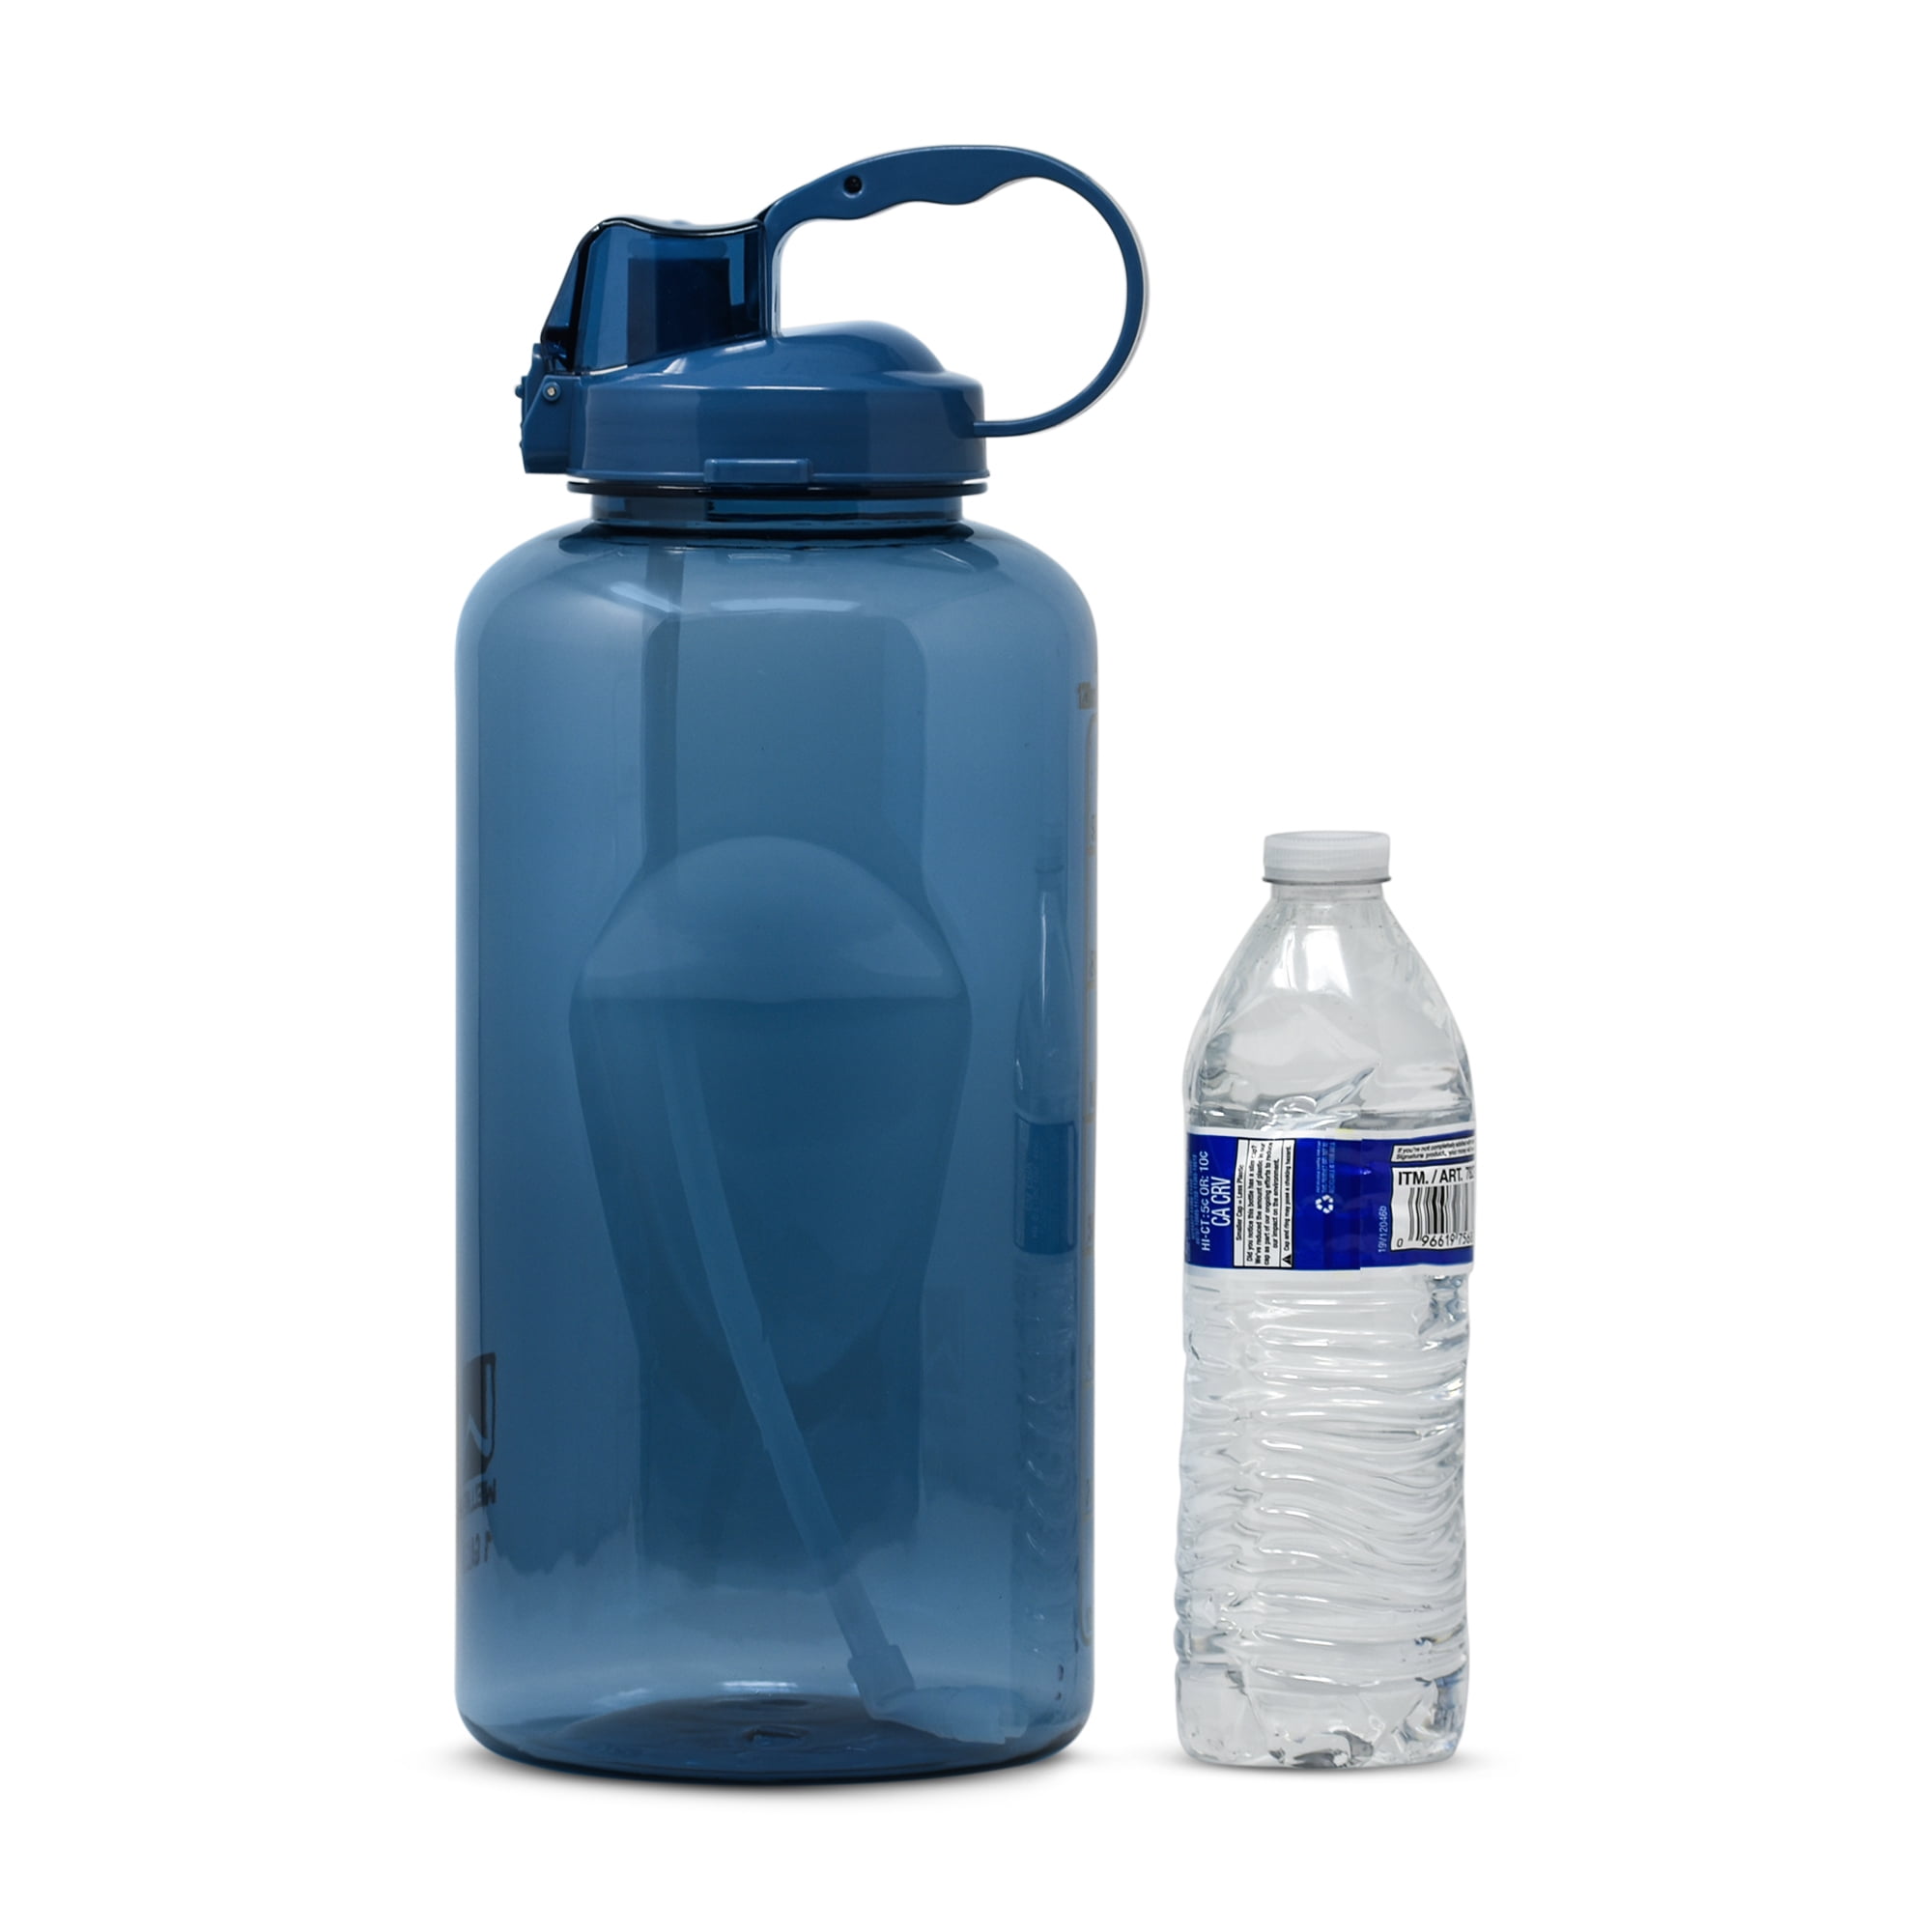 Sports 128 oz. Water Bottle with Straw Wellness Color: Purple